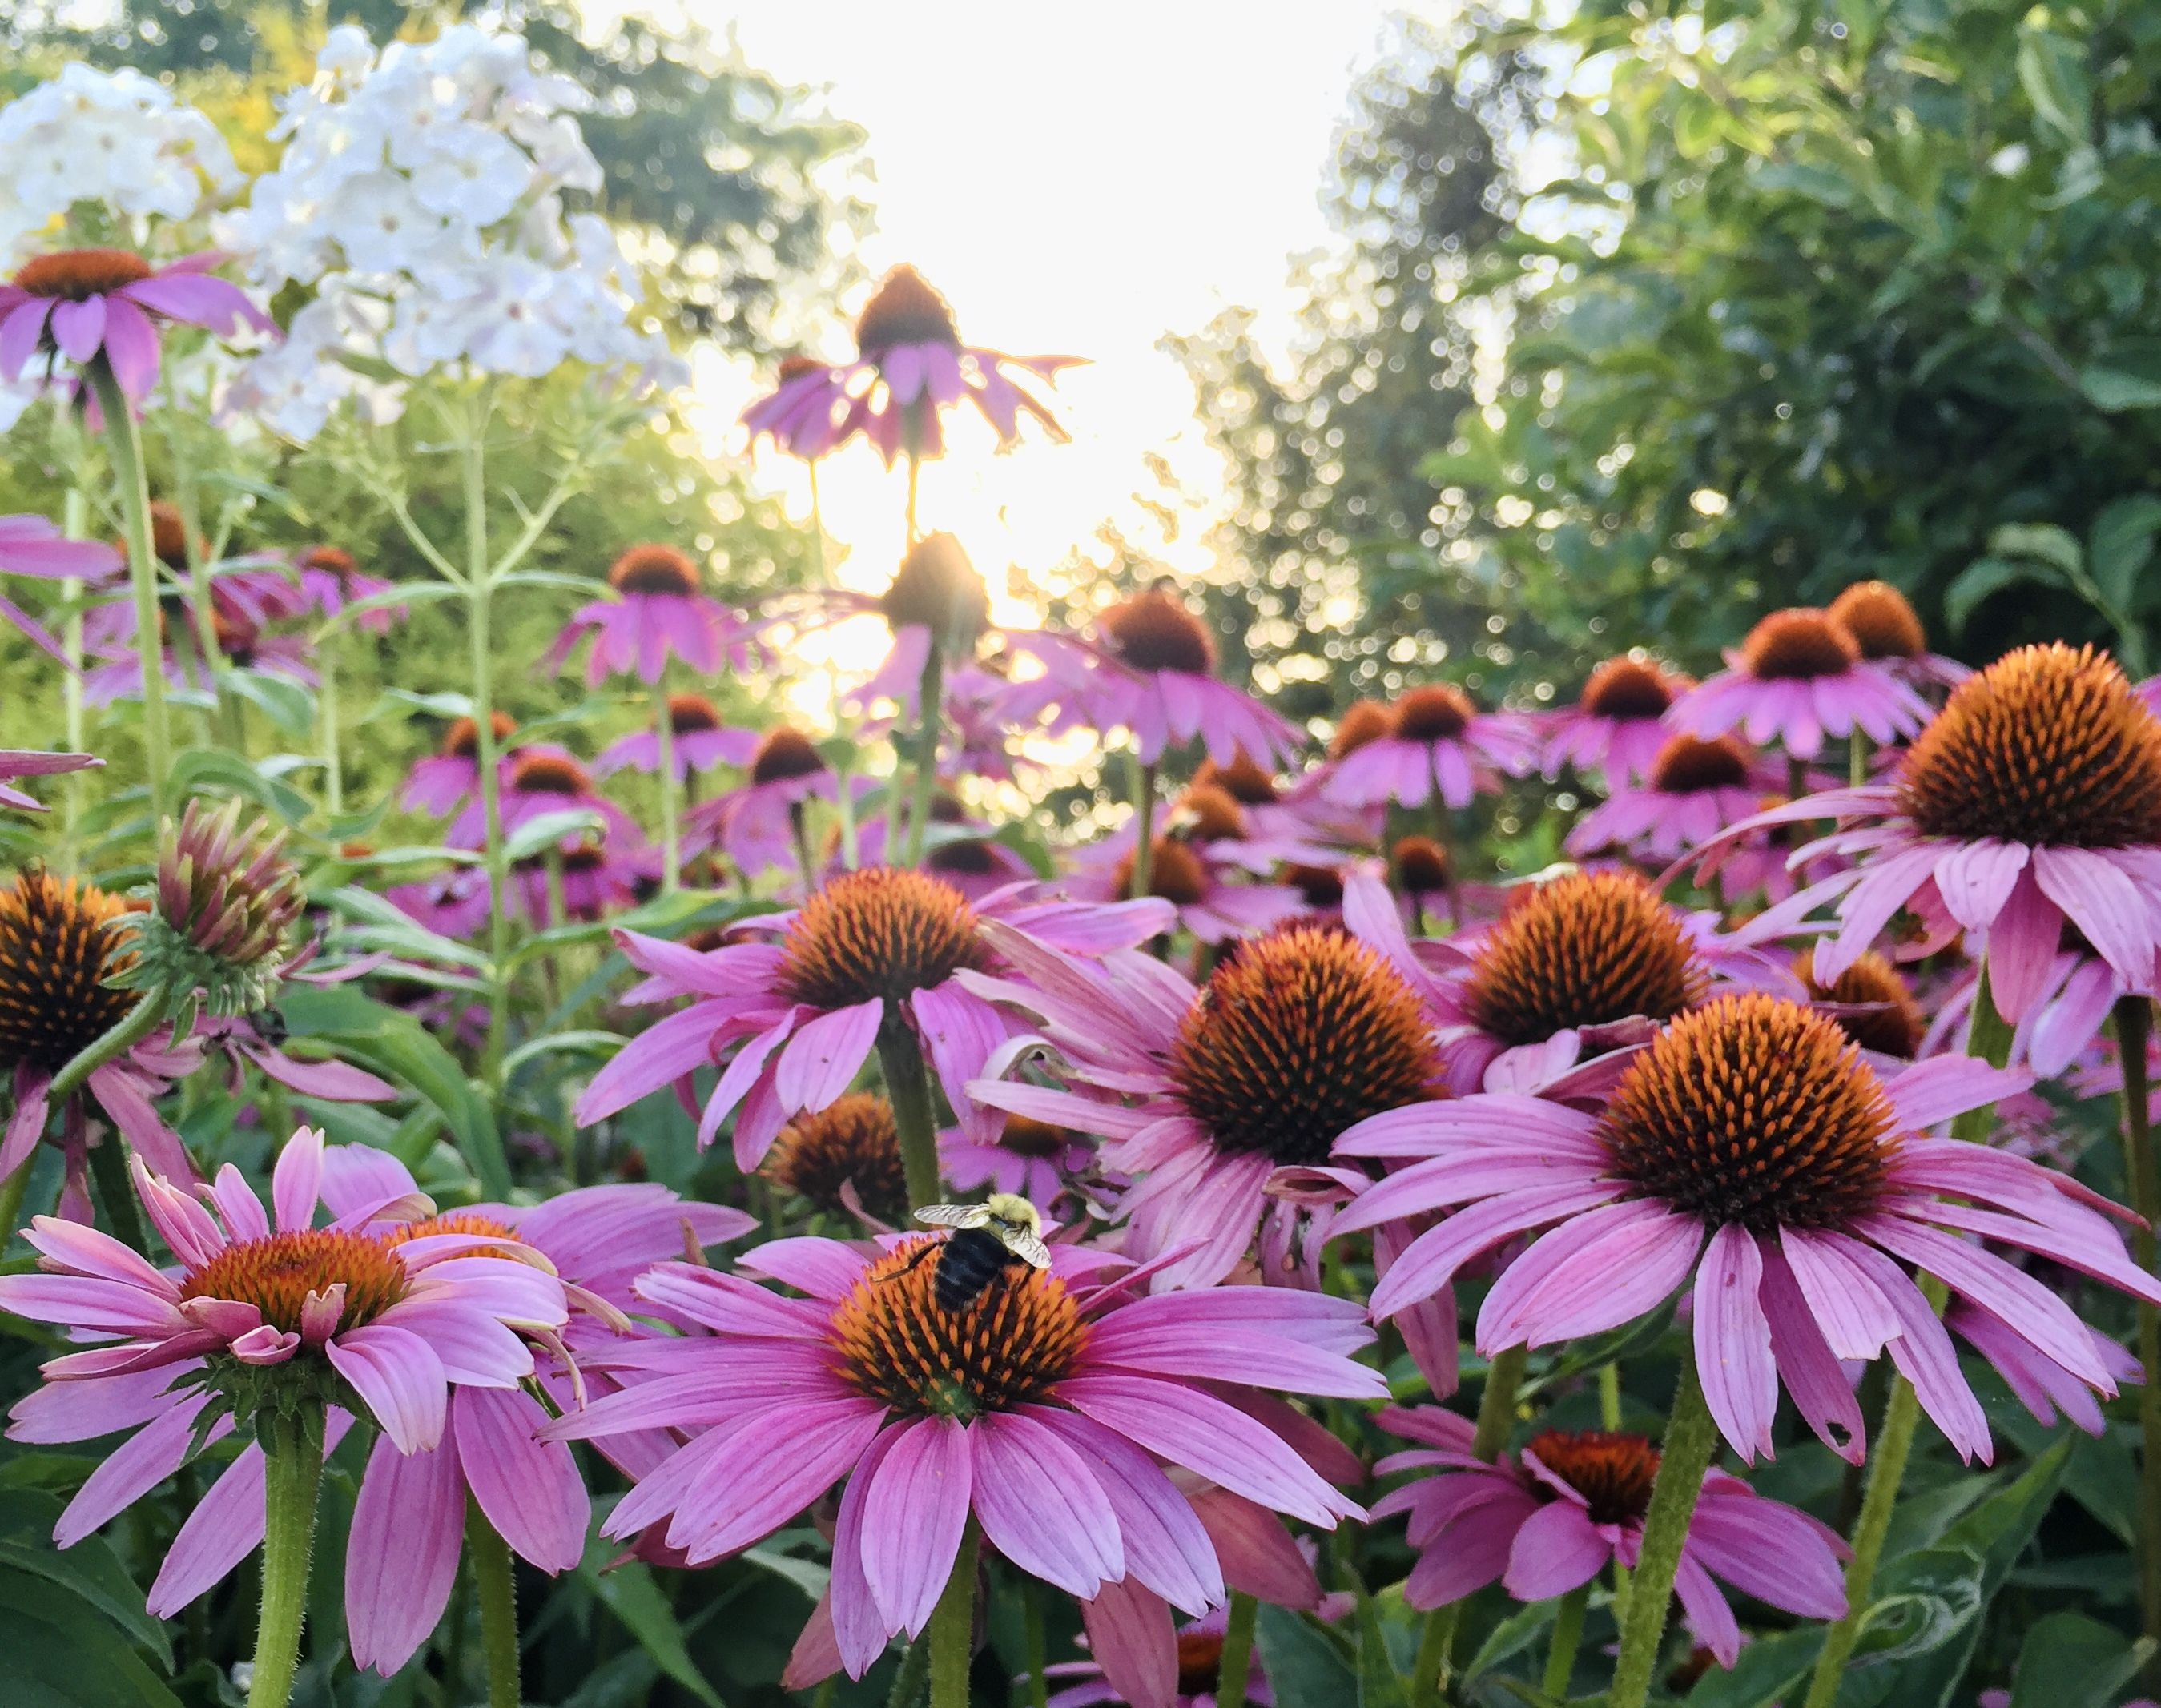  Flowers That Attract Bees - Pollinator-Friendly Plants